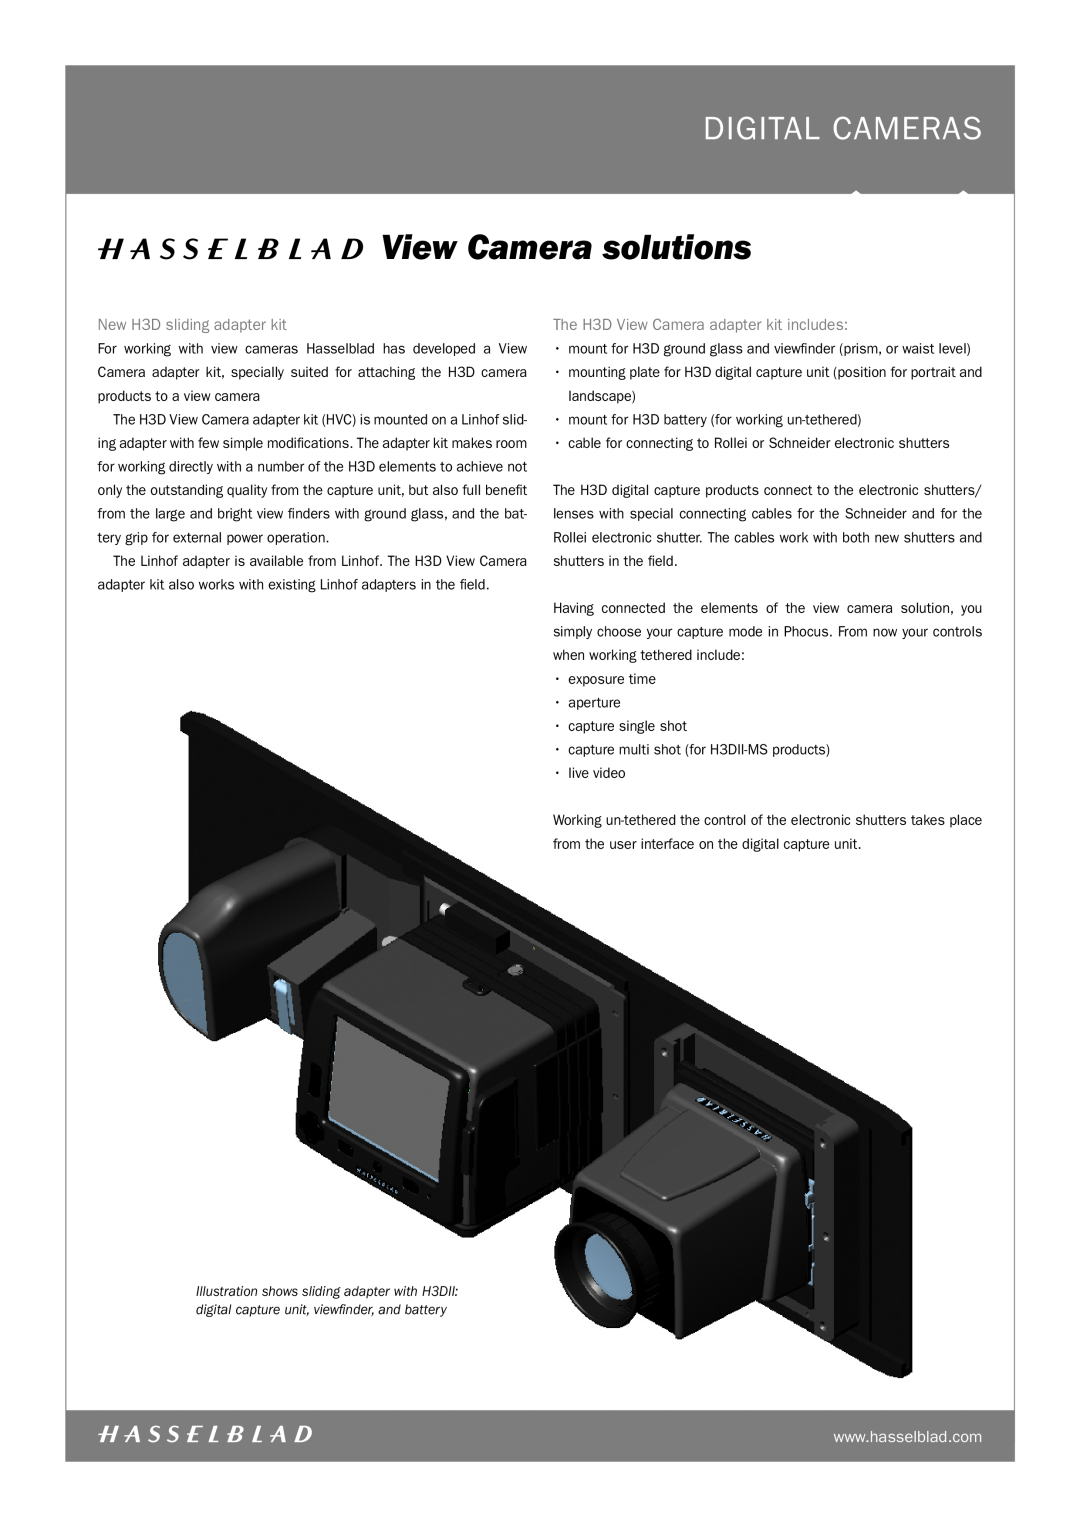 Hasselblad CF, H3DII, H3dii-MS New H3D sliding adapter kit, The H3D View Camera adapter kit includes, View Camera solutions 